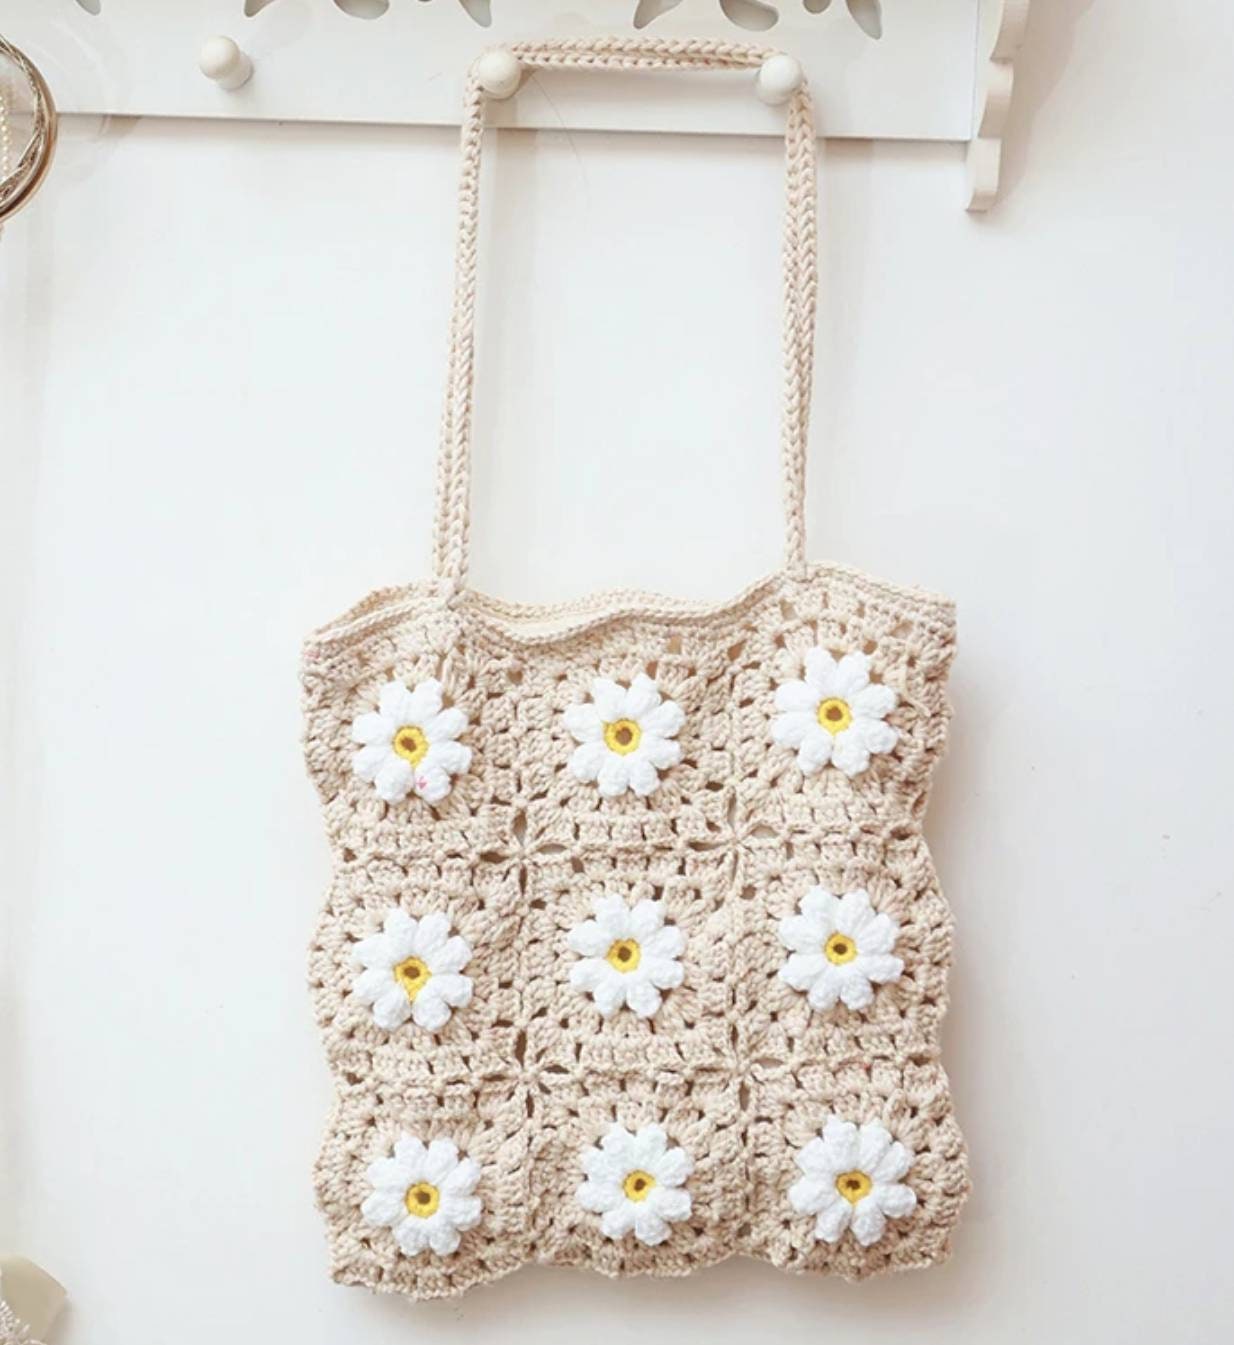 Knitted Flower Tote SEBE Flower Knitted Shoulder Tote Tote Bag - Etsy